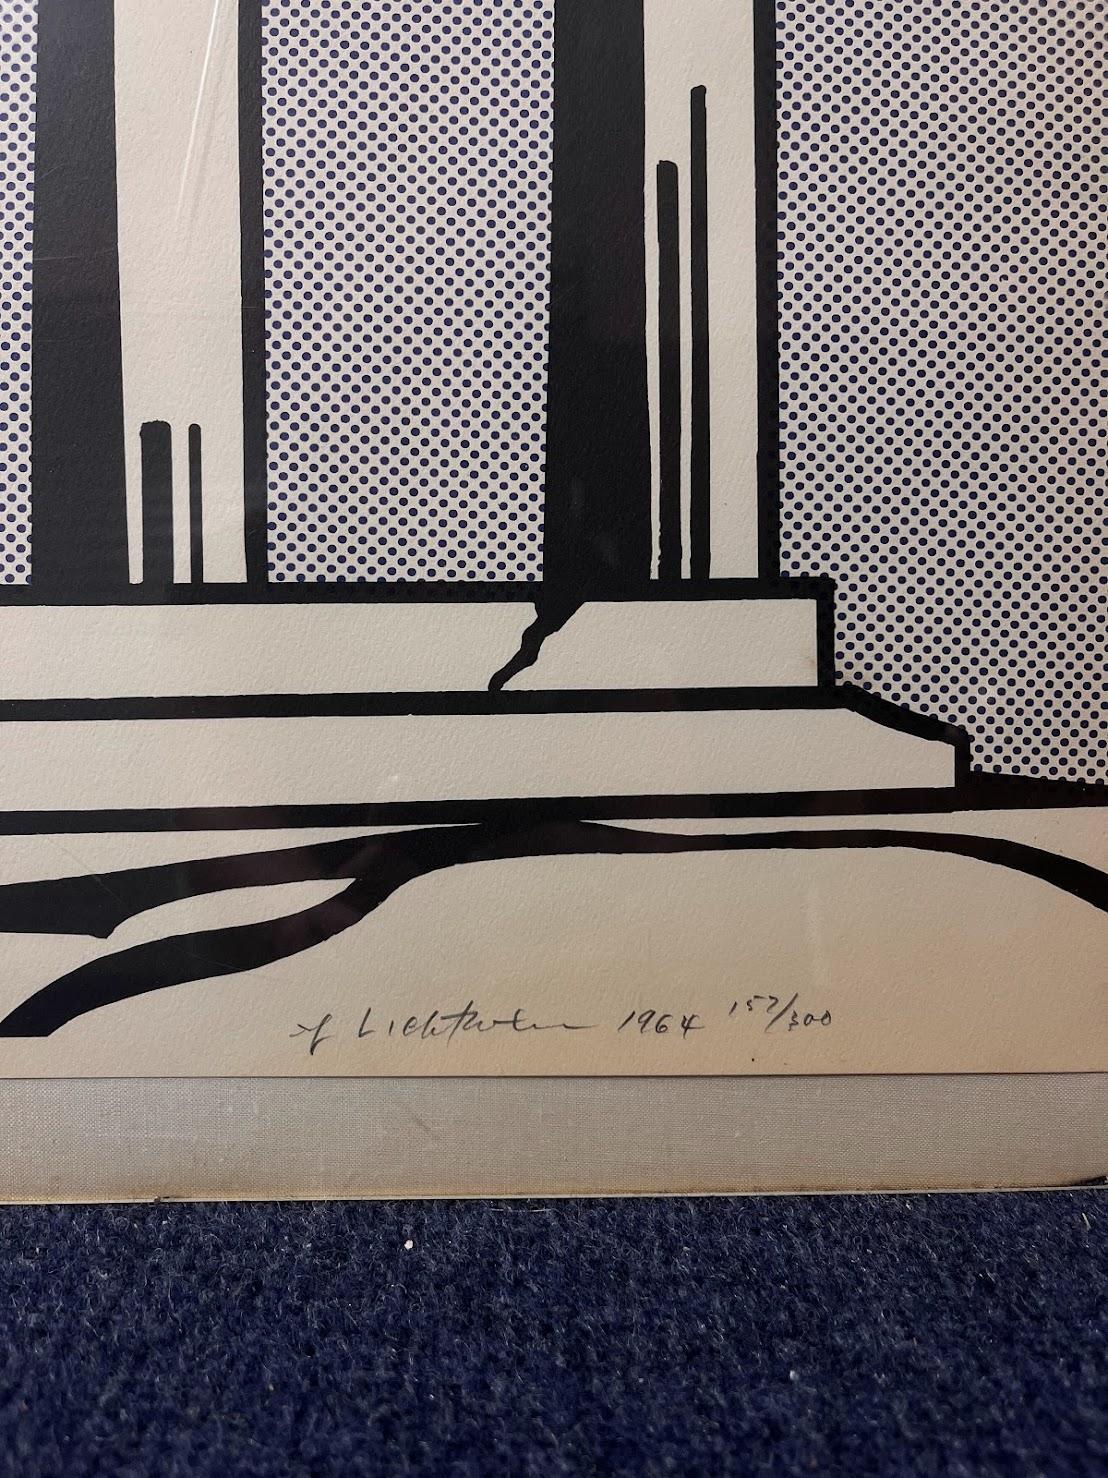 This remarkable Lichtenstein offset lithograph 'Temple' exemplifies his interest in reimagining landmarks in his graphic style. In the bottom right corner, this image is signed, dated in pencil and numbered 152/300. It was published by Leo Castelli